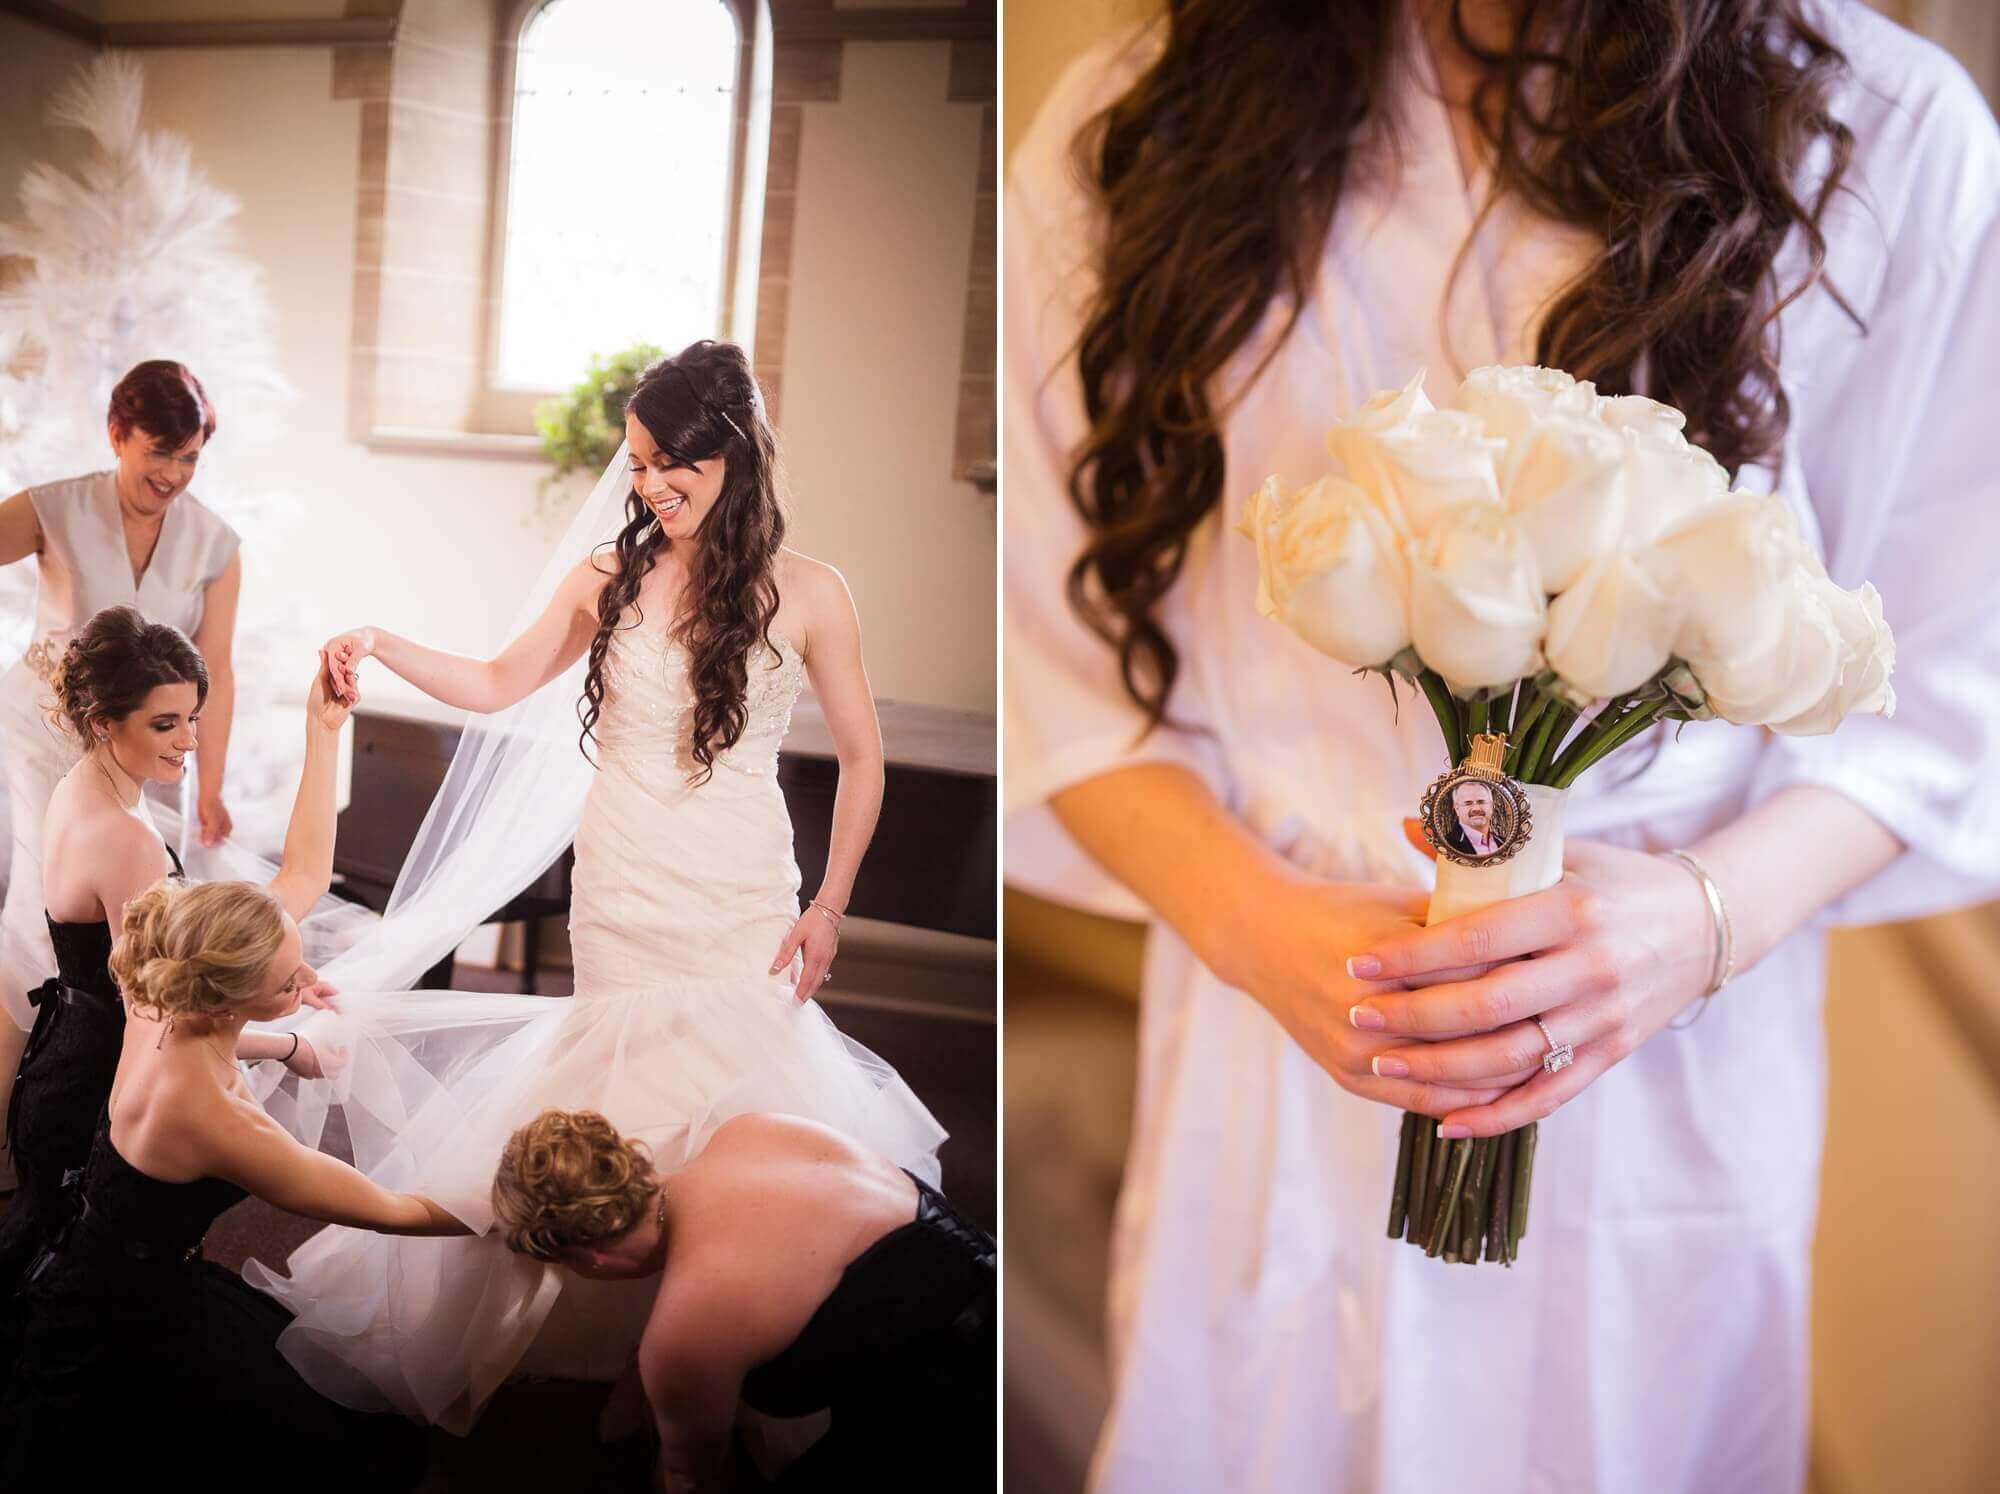 The bride is put into her dress with help from her bridal party in Toronto